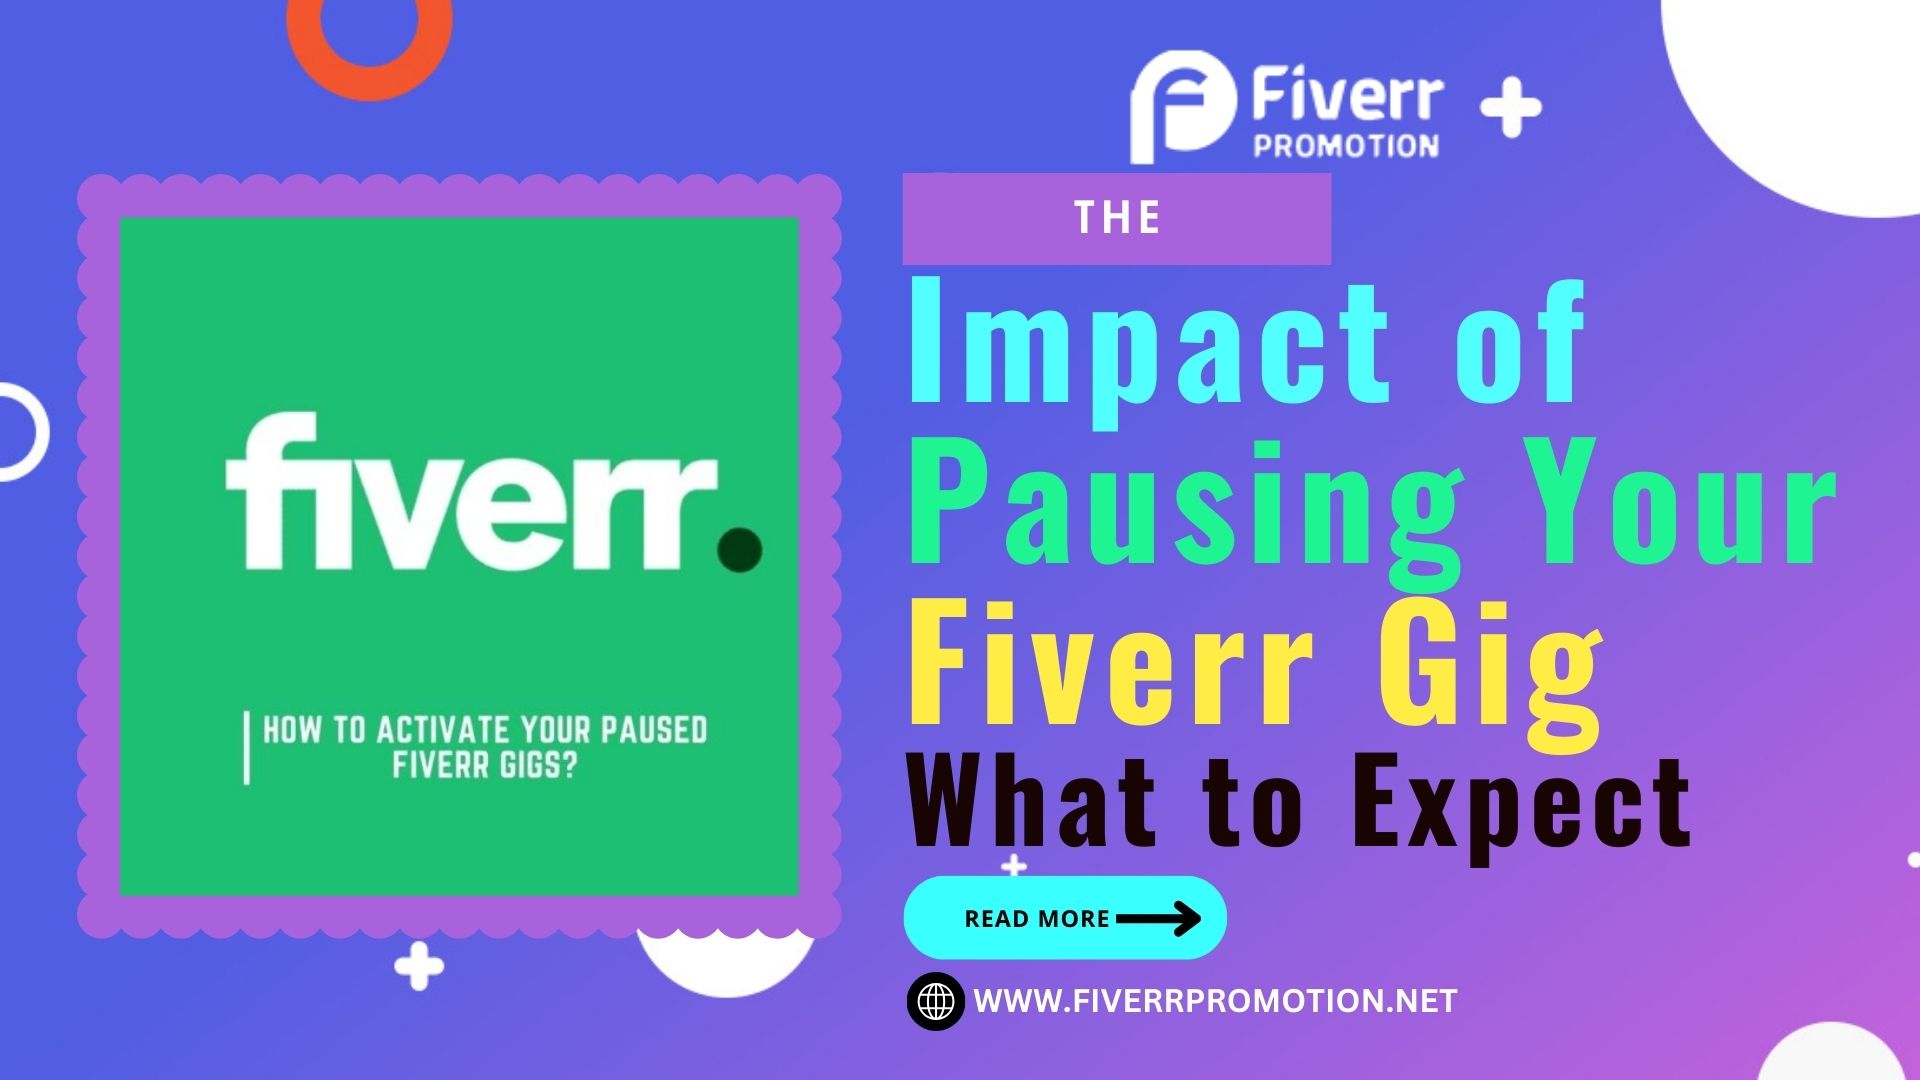 The Impact of Pausing Your Fiverr Gig: What to Expect